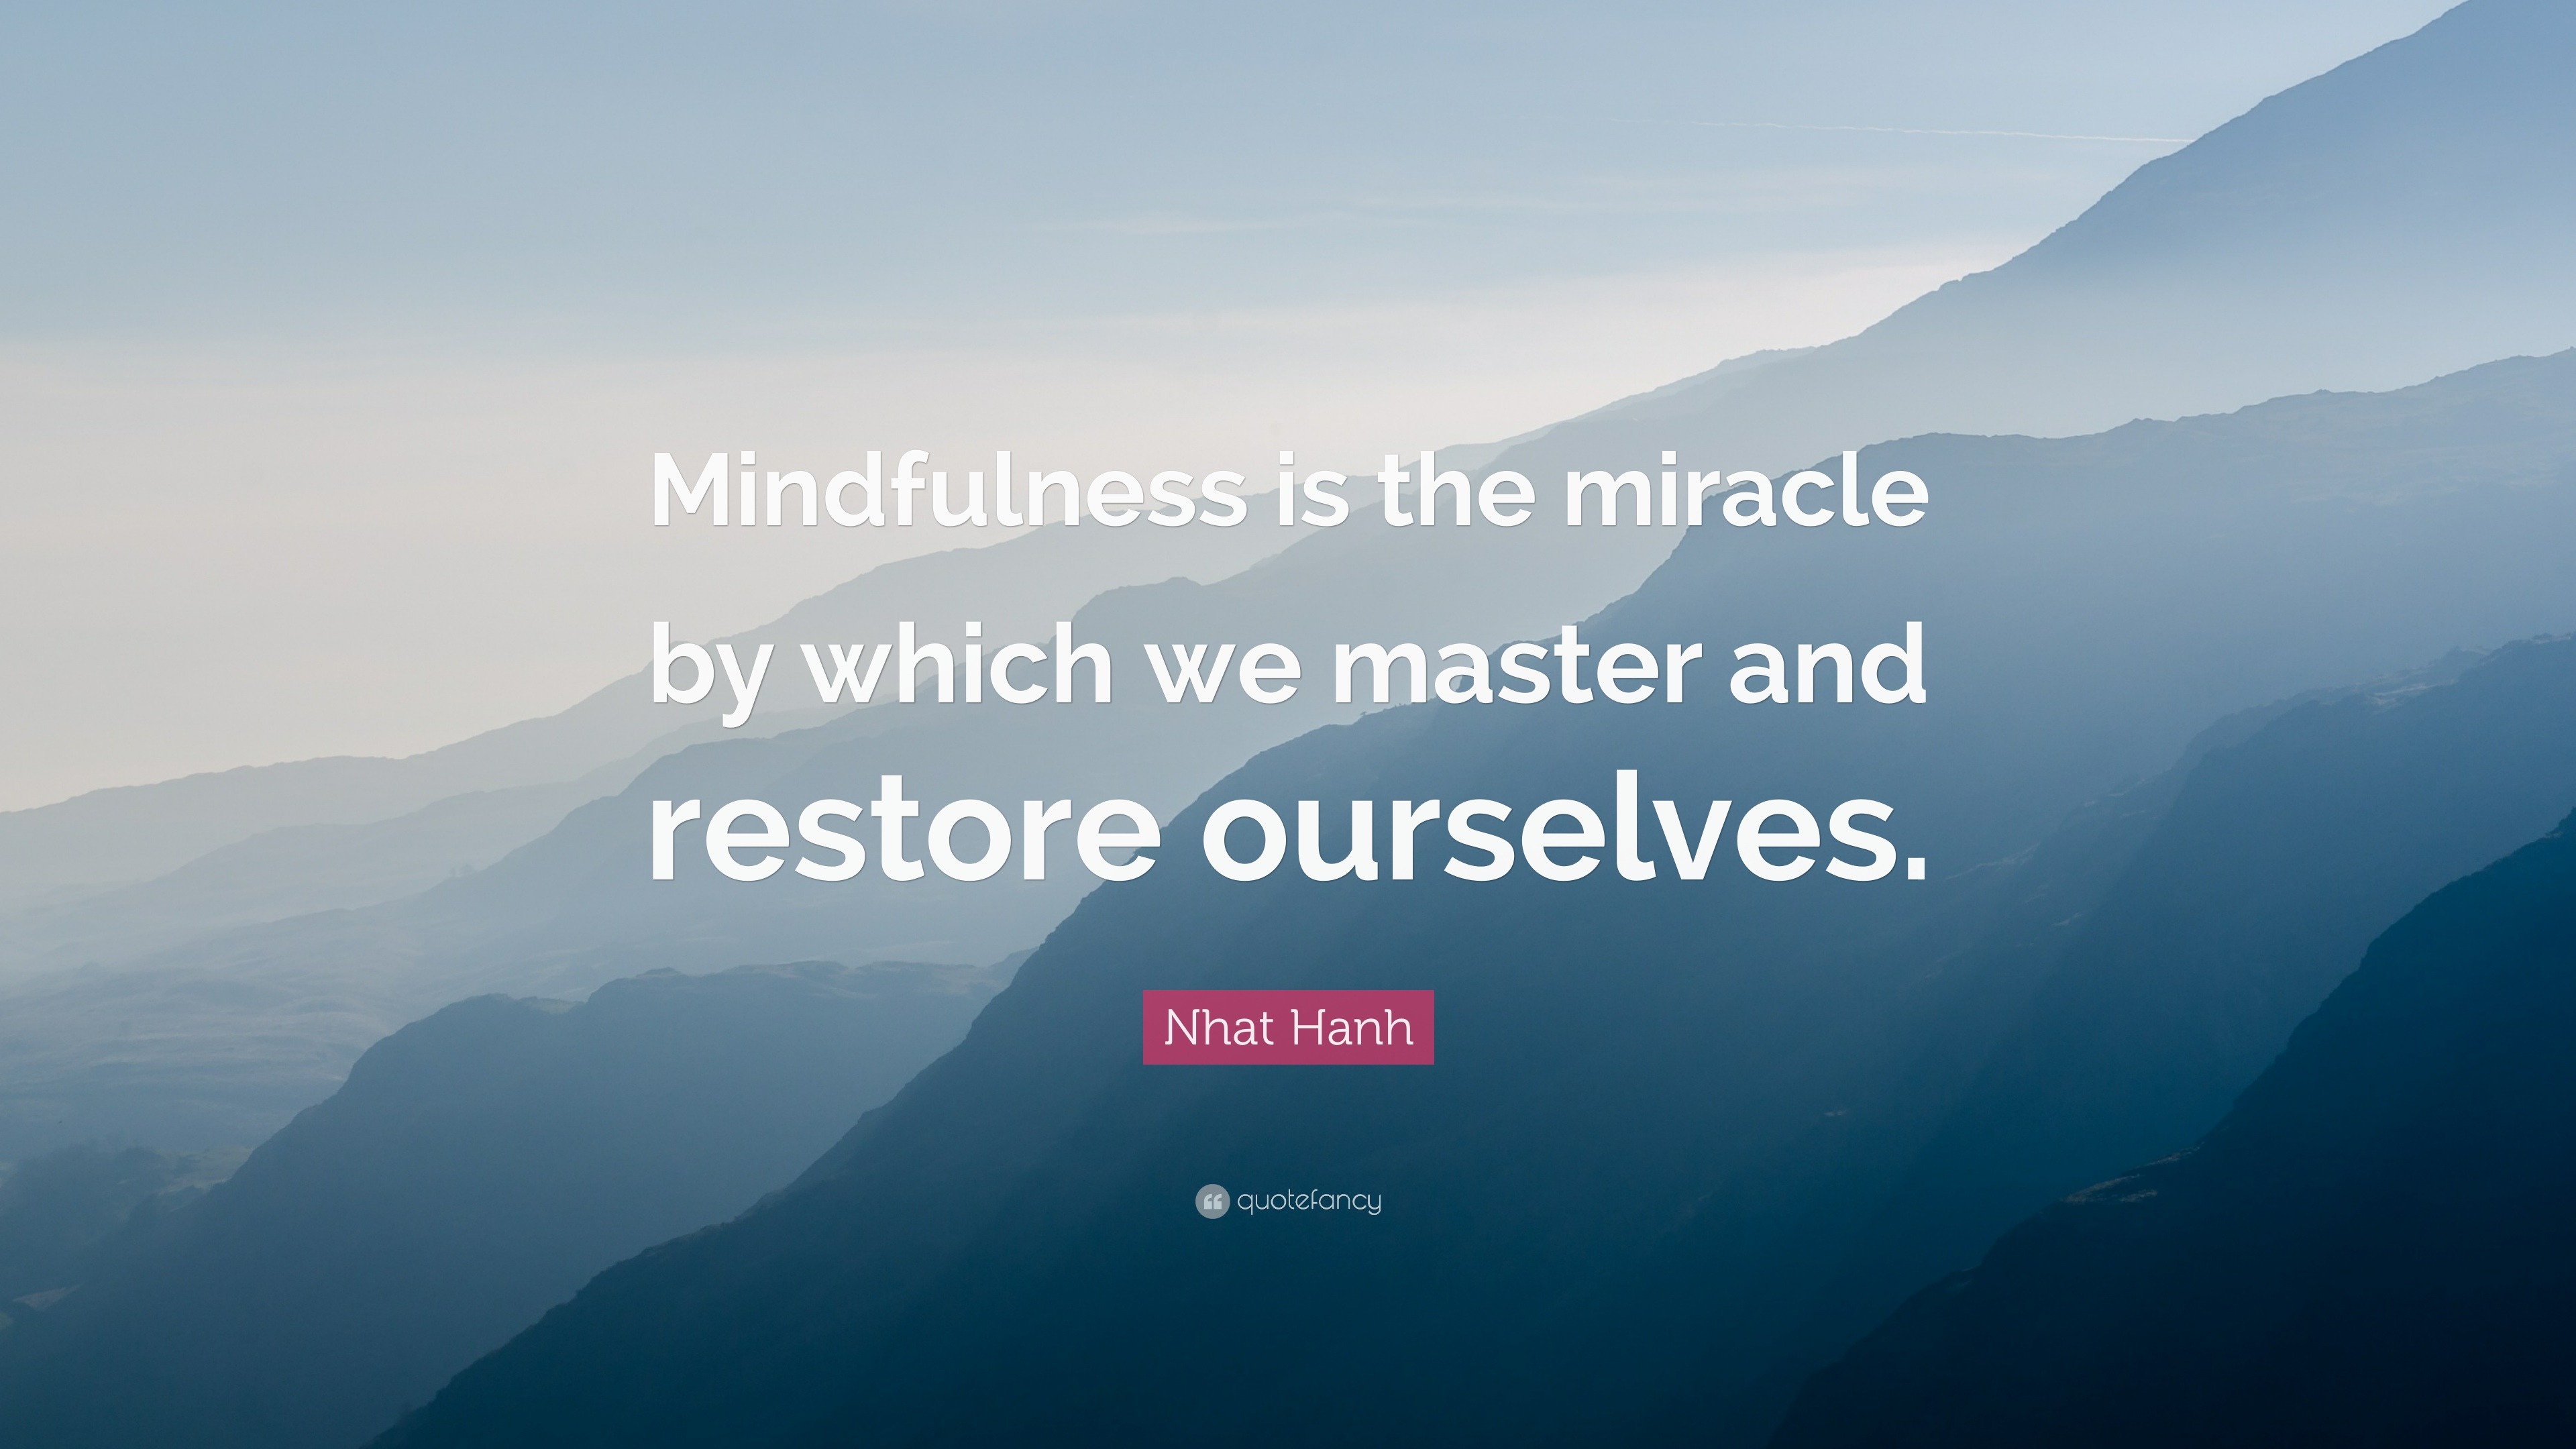 Mindfulness Quotes (40 wallpapers) - Quotefancy